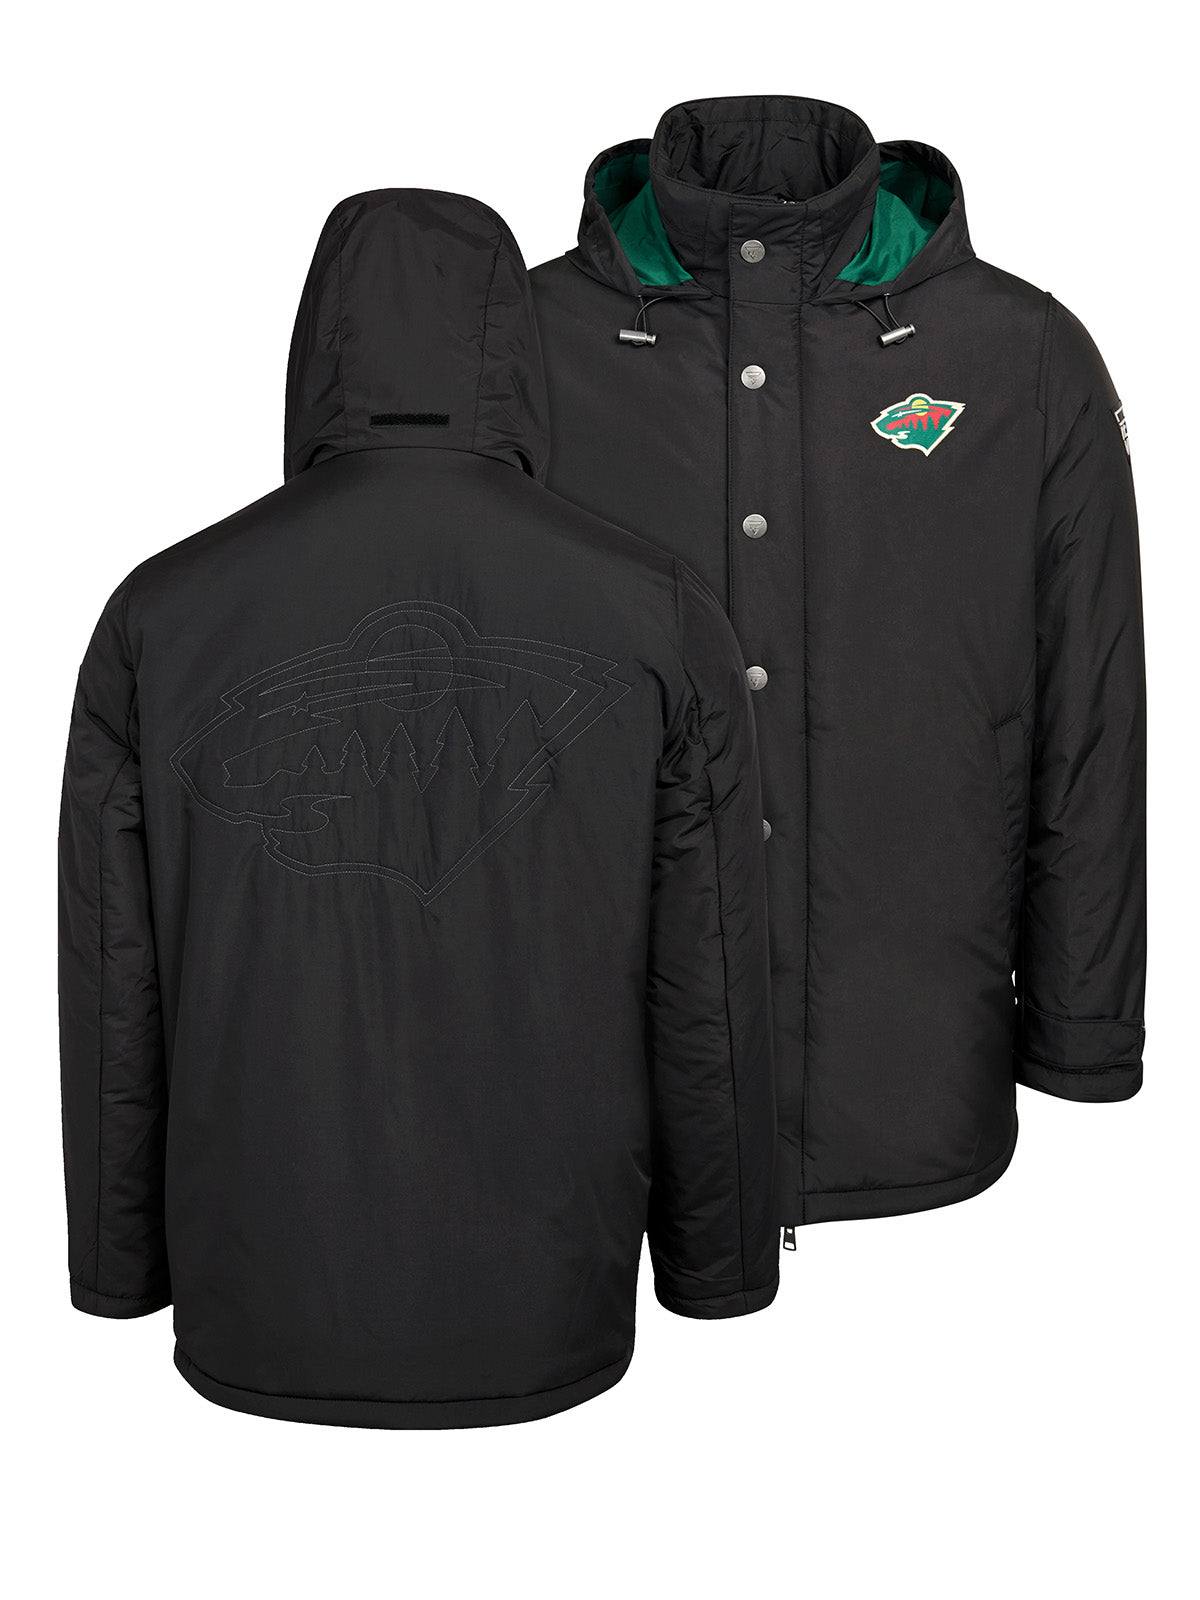 Minnesota Wild Coach's Jacket - The jacket features a quilted stitch of the Minnesota Wild logo centered on the back and has a removal hood in the team colors, elevating this NHL hockey clothing collection